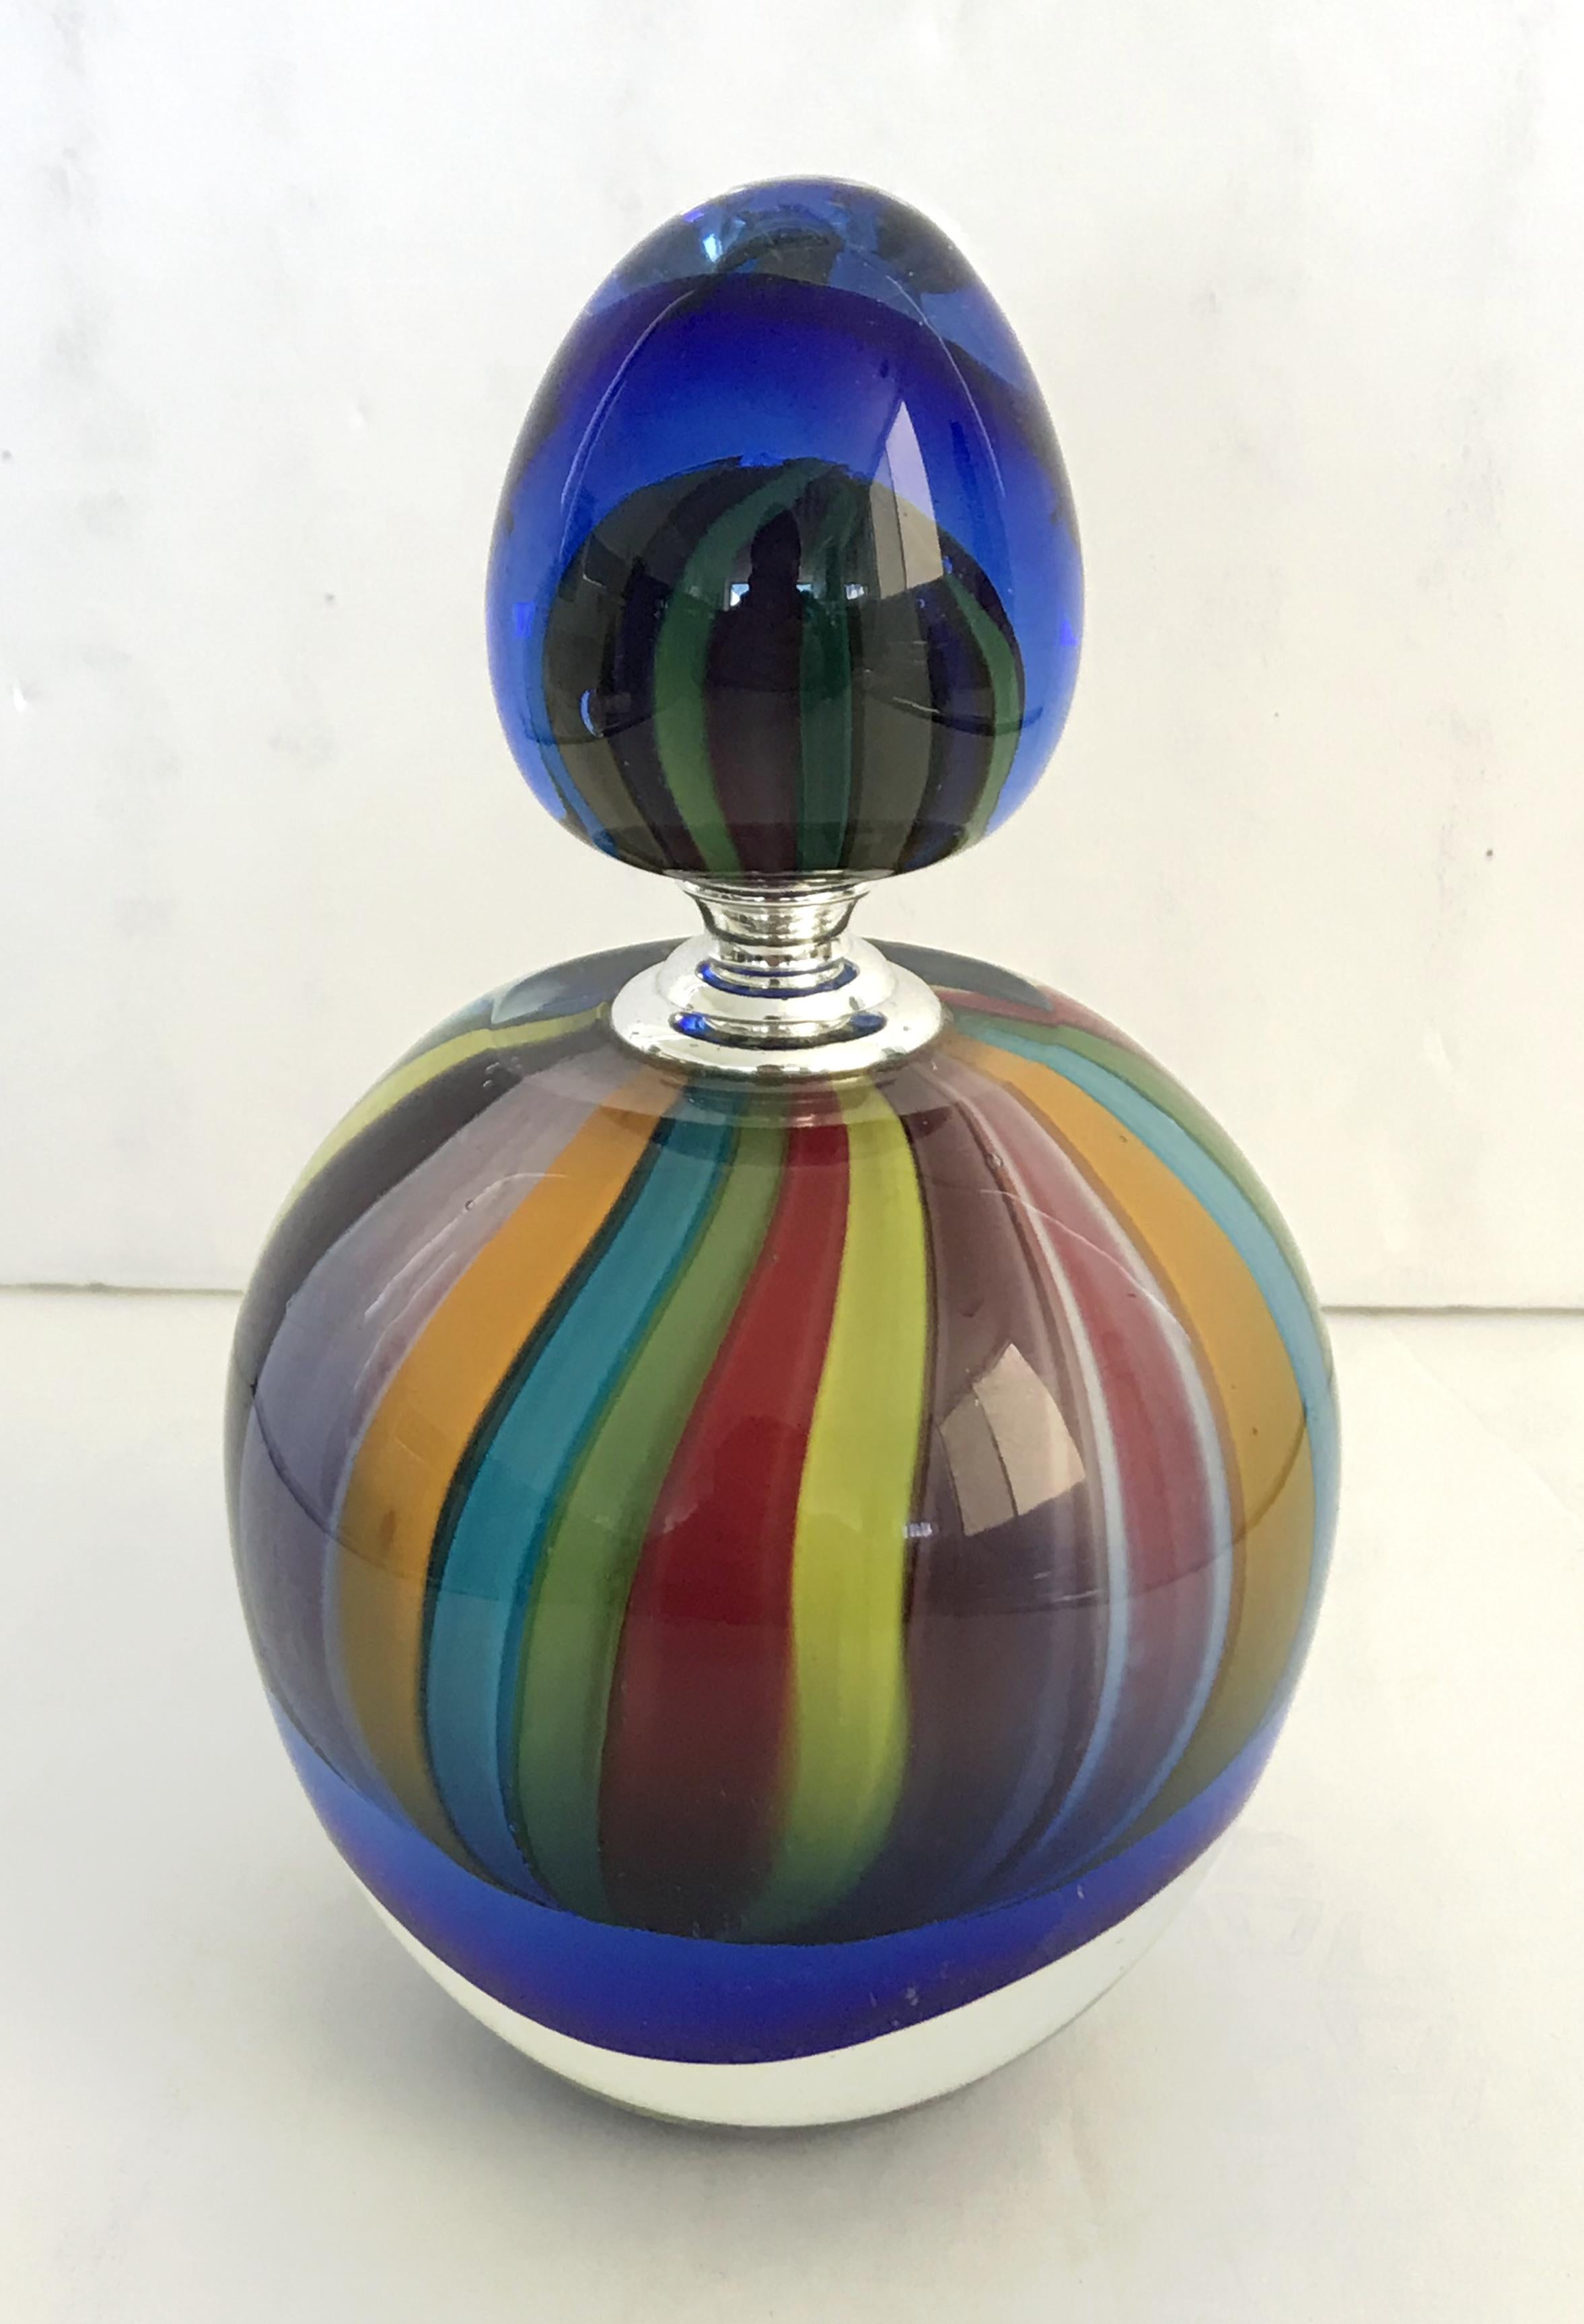 Vintage Italian perfume bottle with its original glass stopper, hand blown Murano glass in rainbow color spectrum, made in Italy by circa 1970s
Measures: diameter 4 inches, total height 7 inches, base height 4 inches, top diameter 2 inches, top